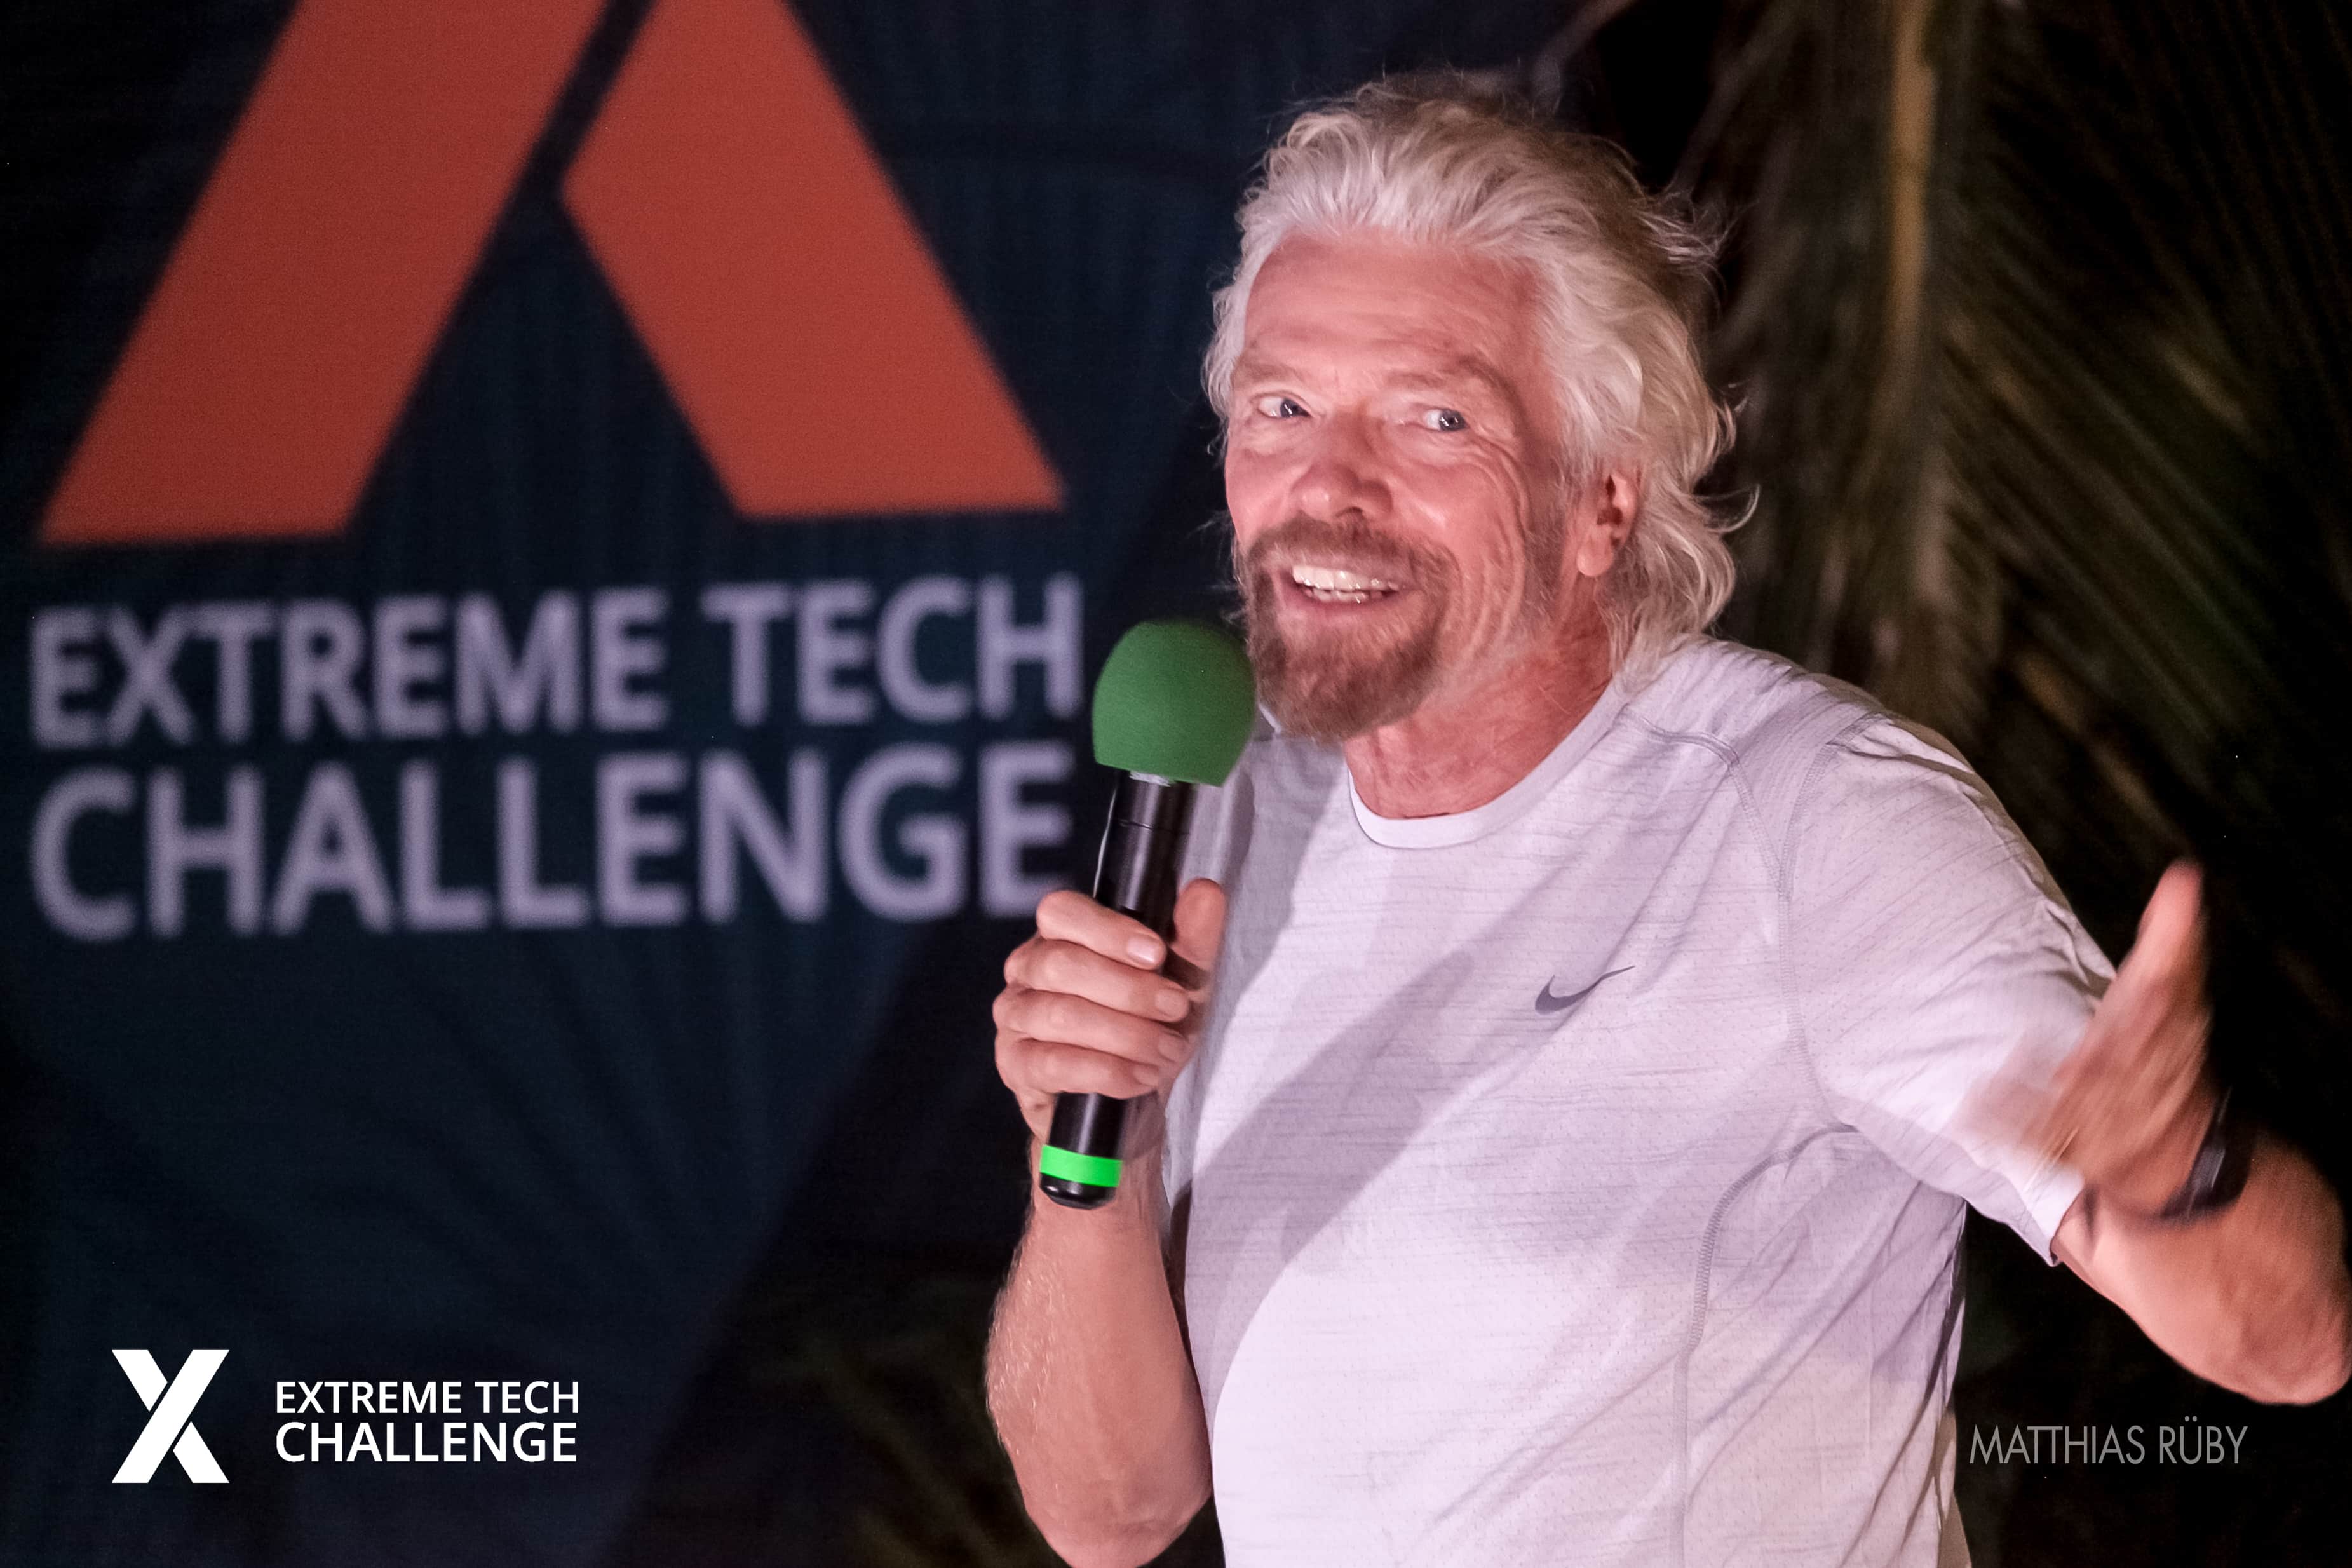 Richard Branson’s Tech Contest Extends Opportunity for Startups